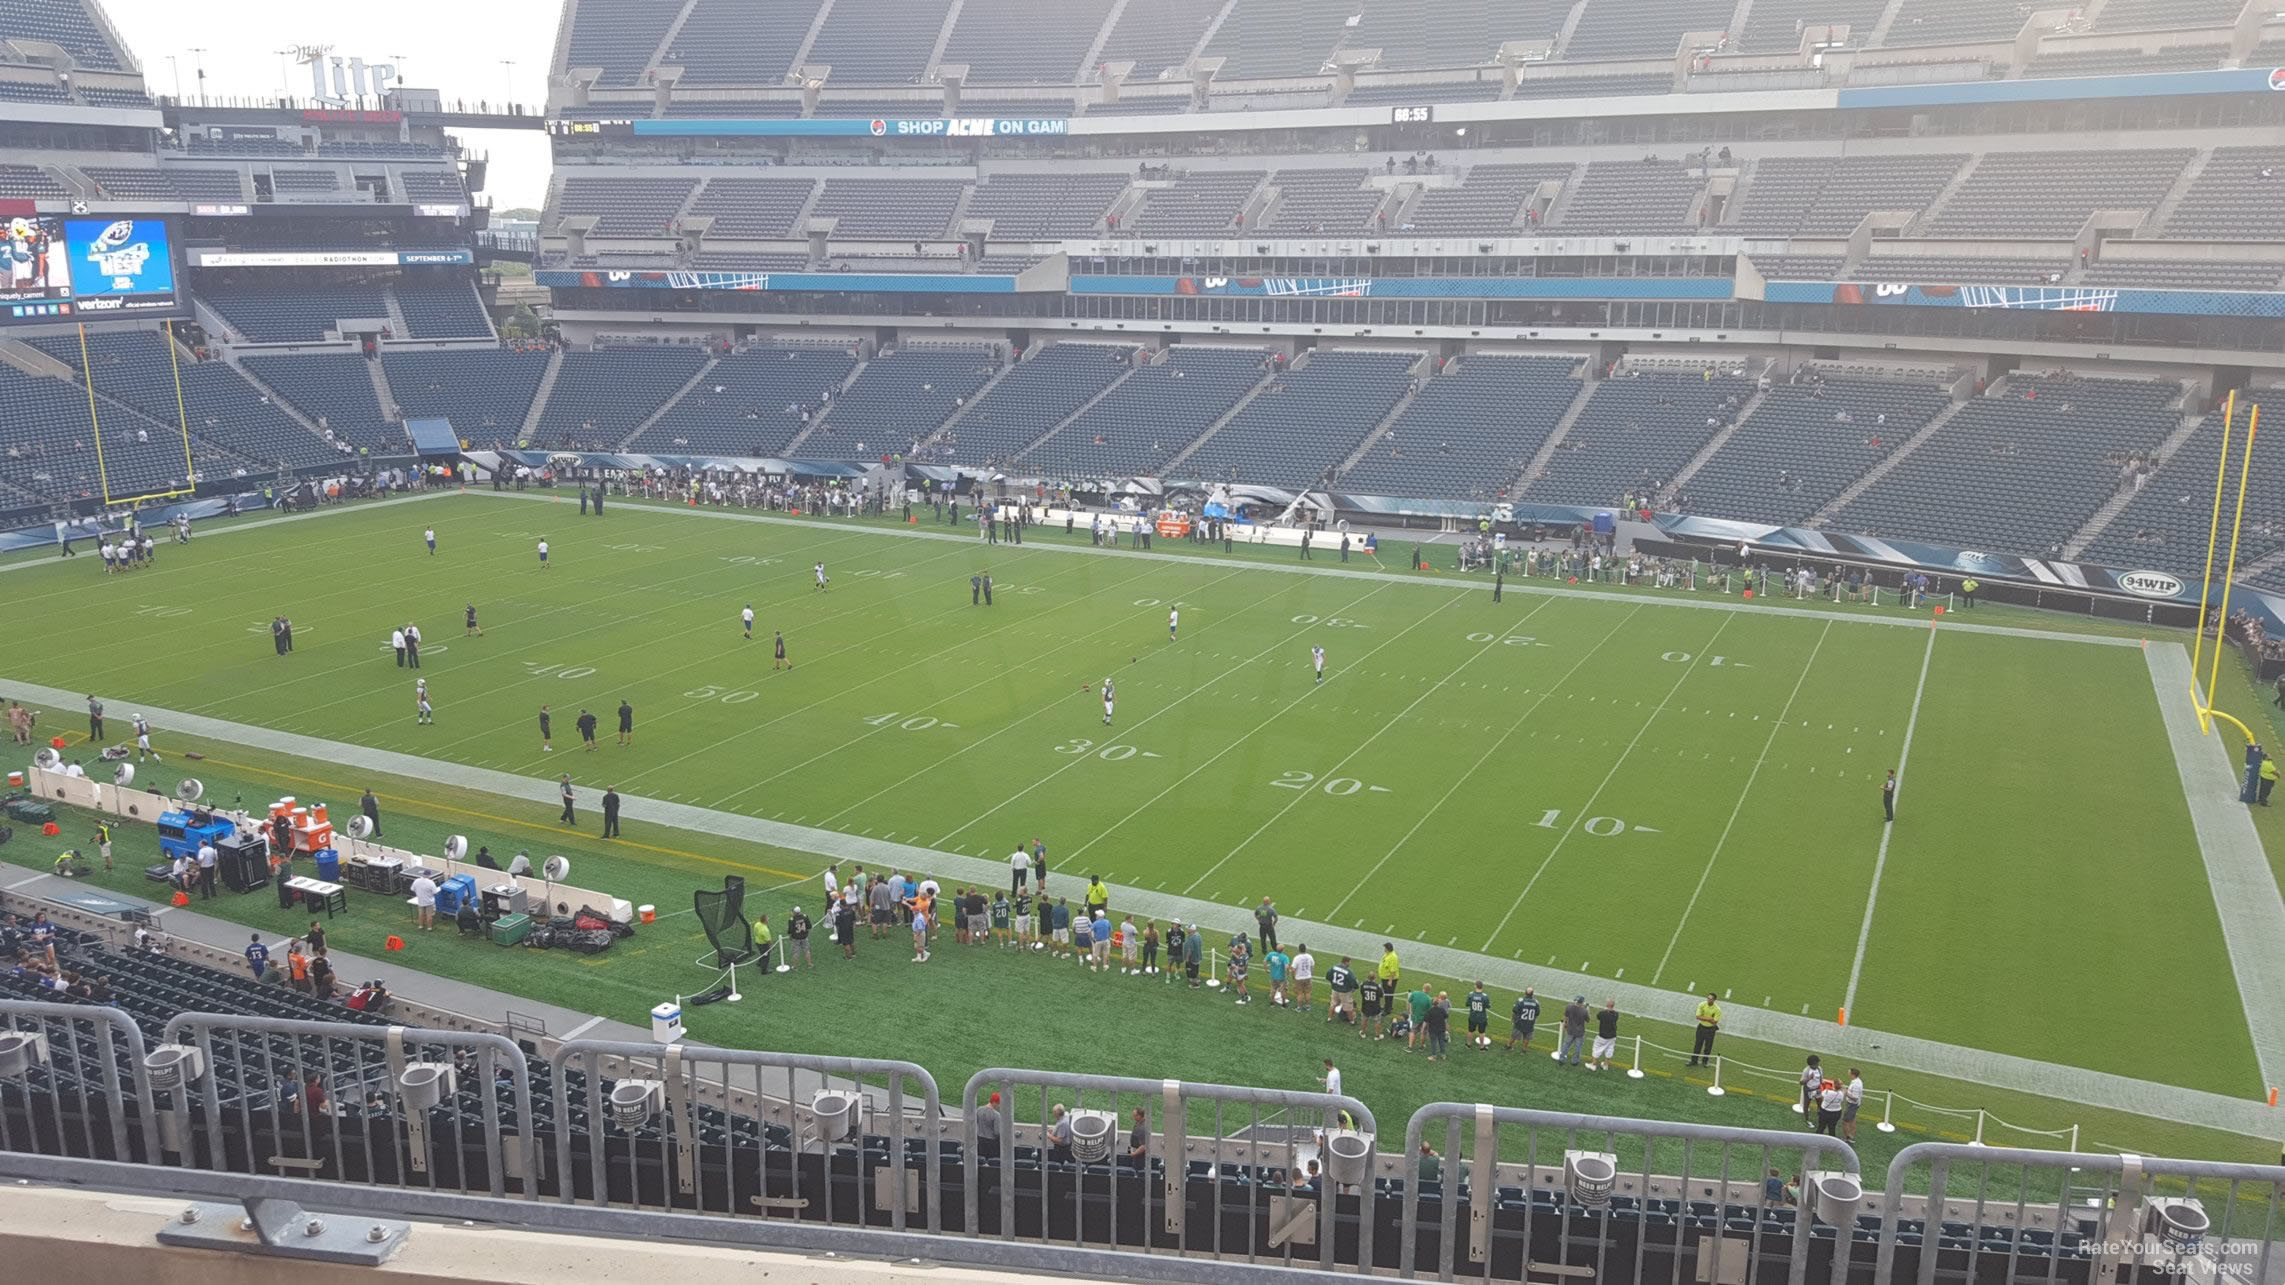 section c25, row 7 seat view  for football - lincoln financial field